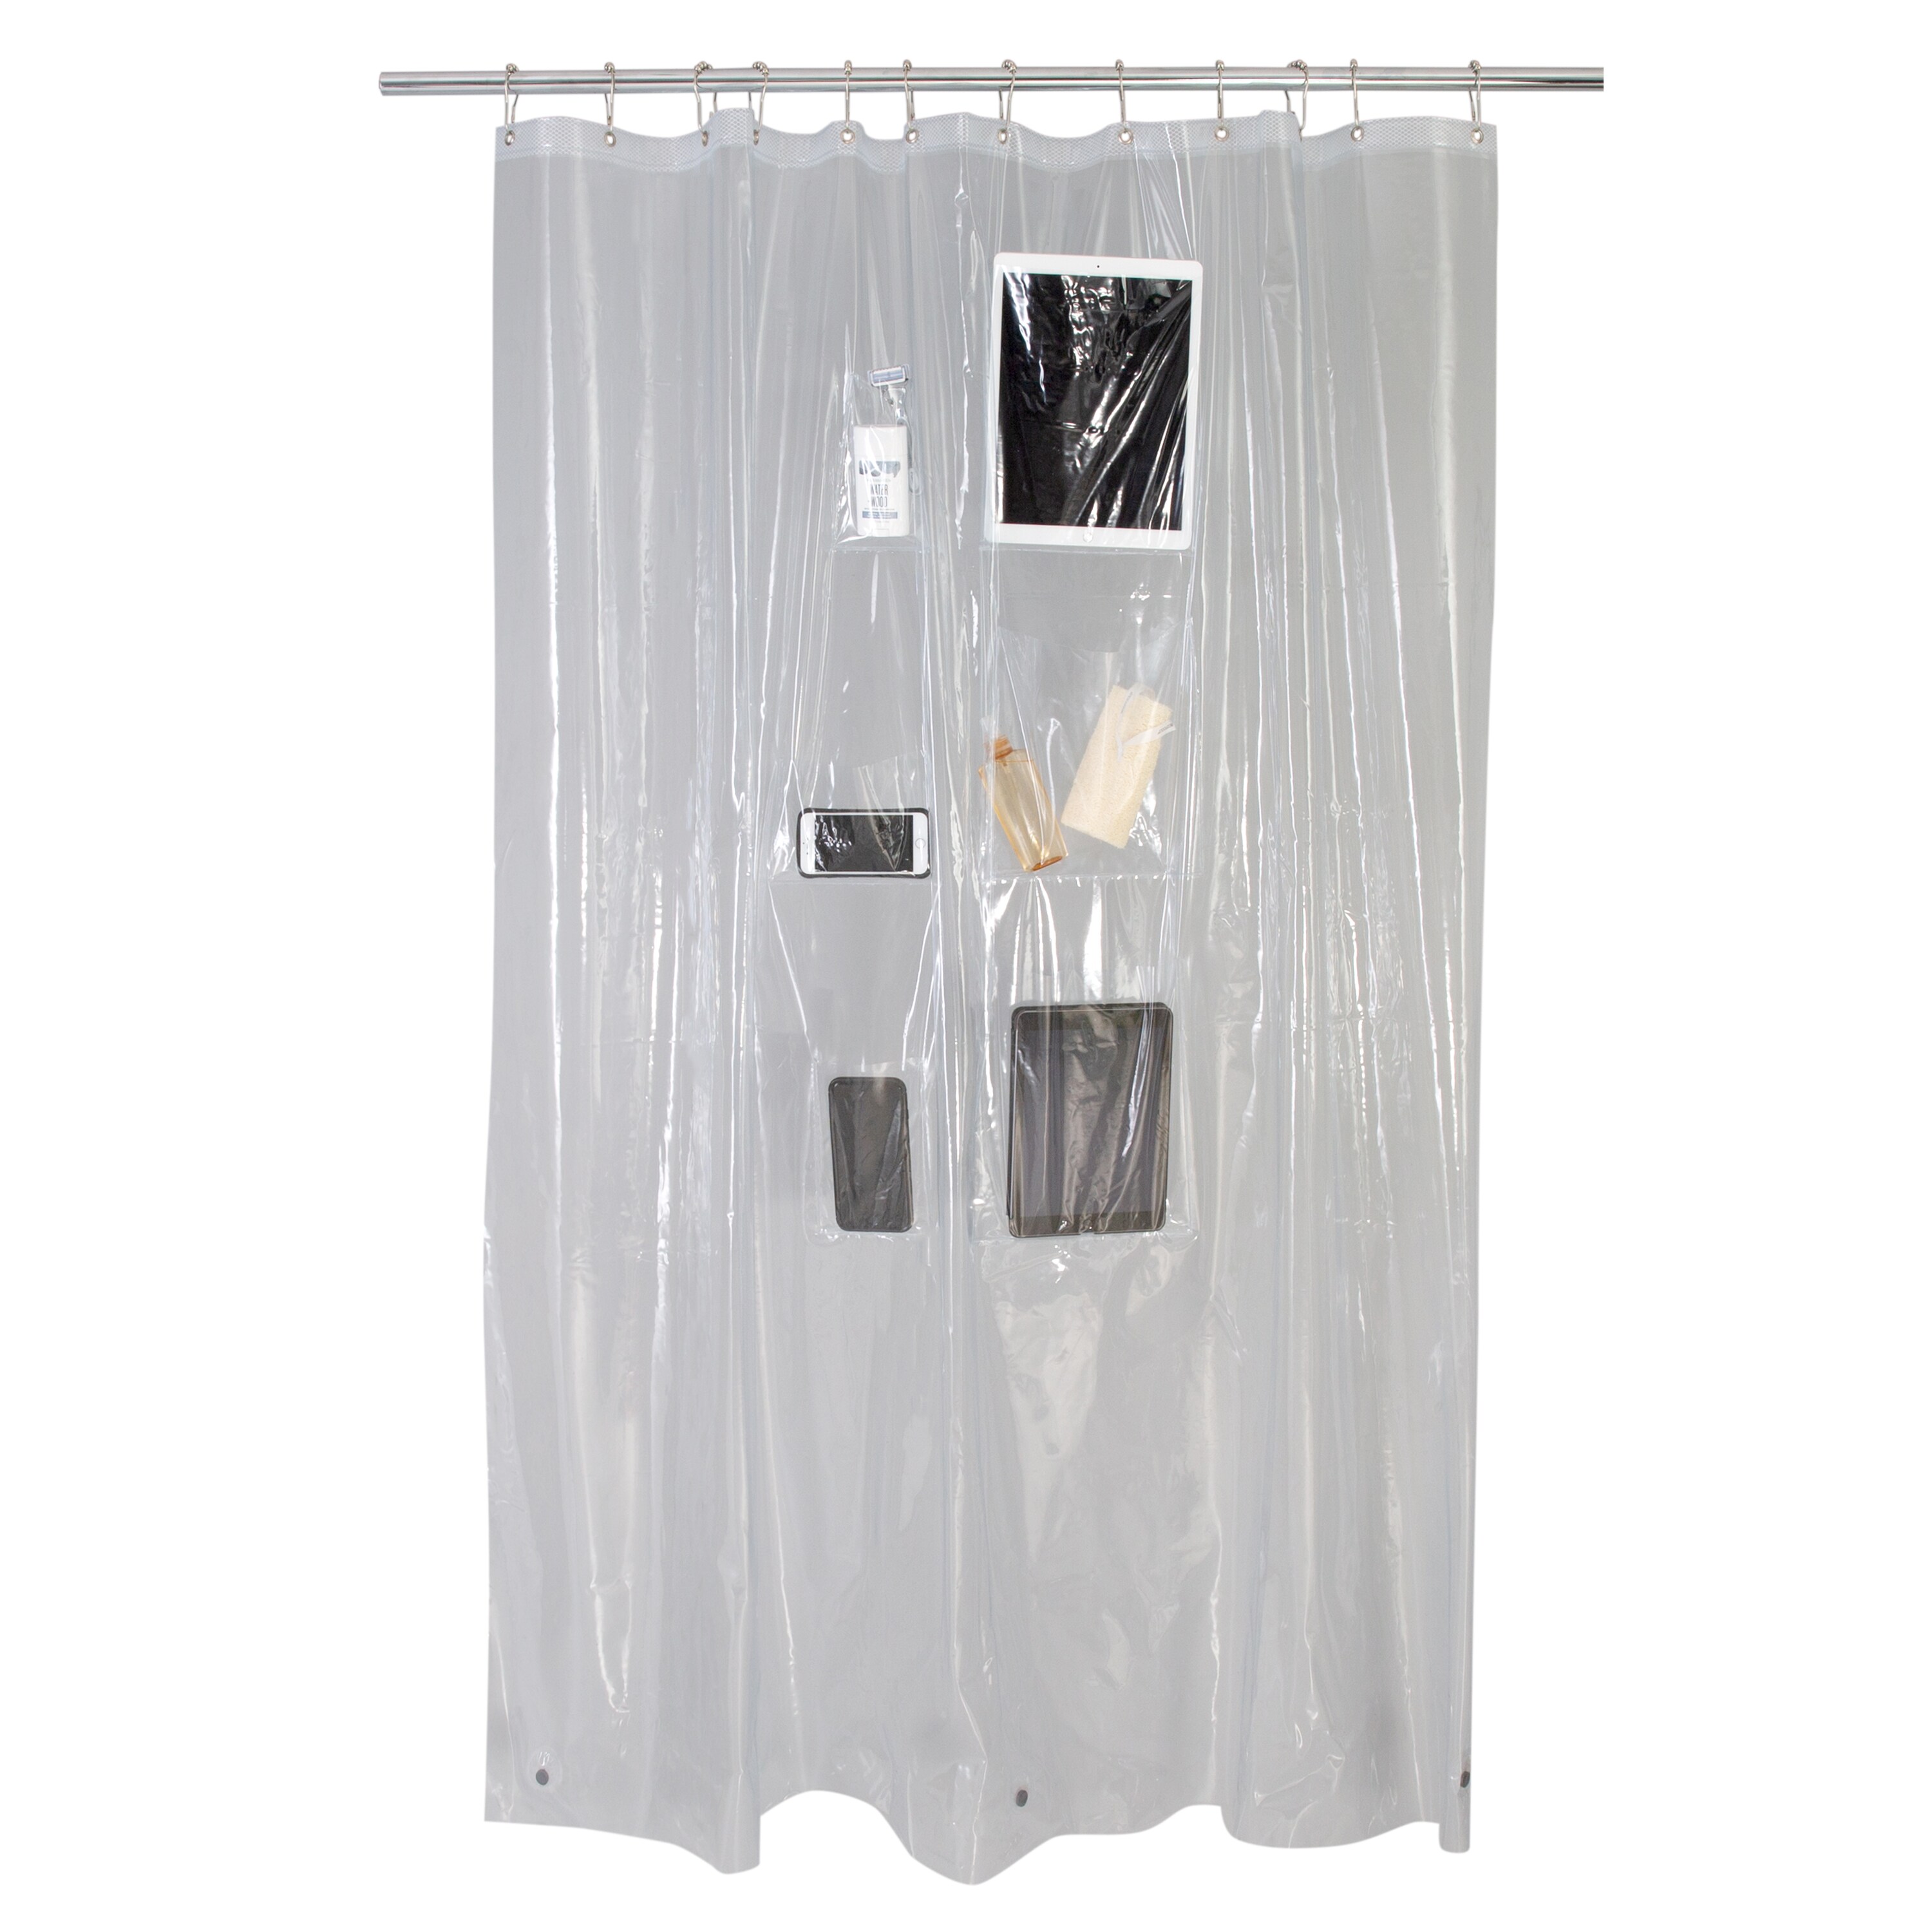 Size 70"... "Pockets" peva shower curtain or liner with 9 mesh storage pockets 